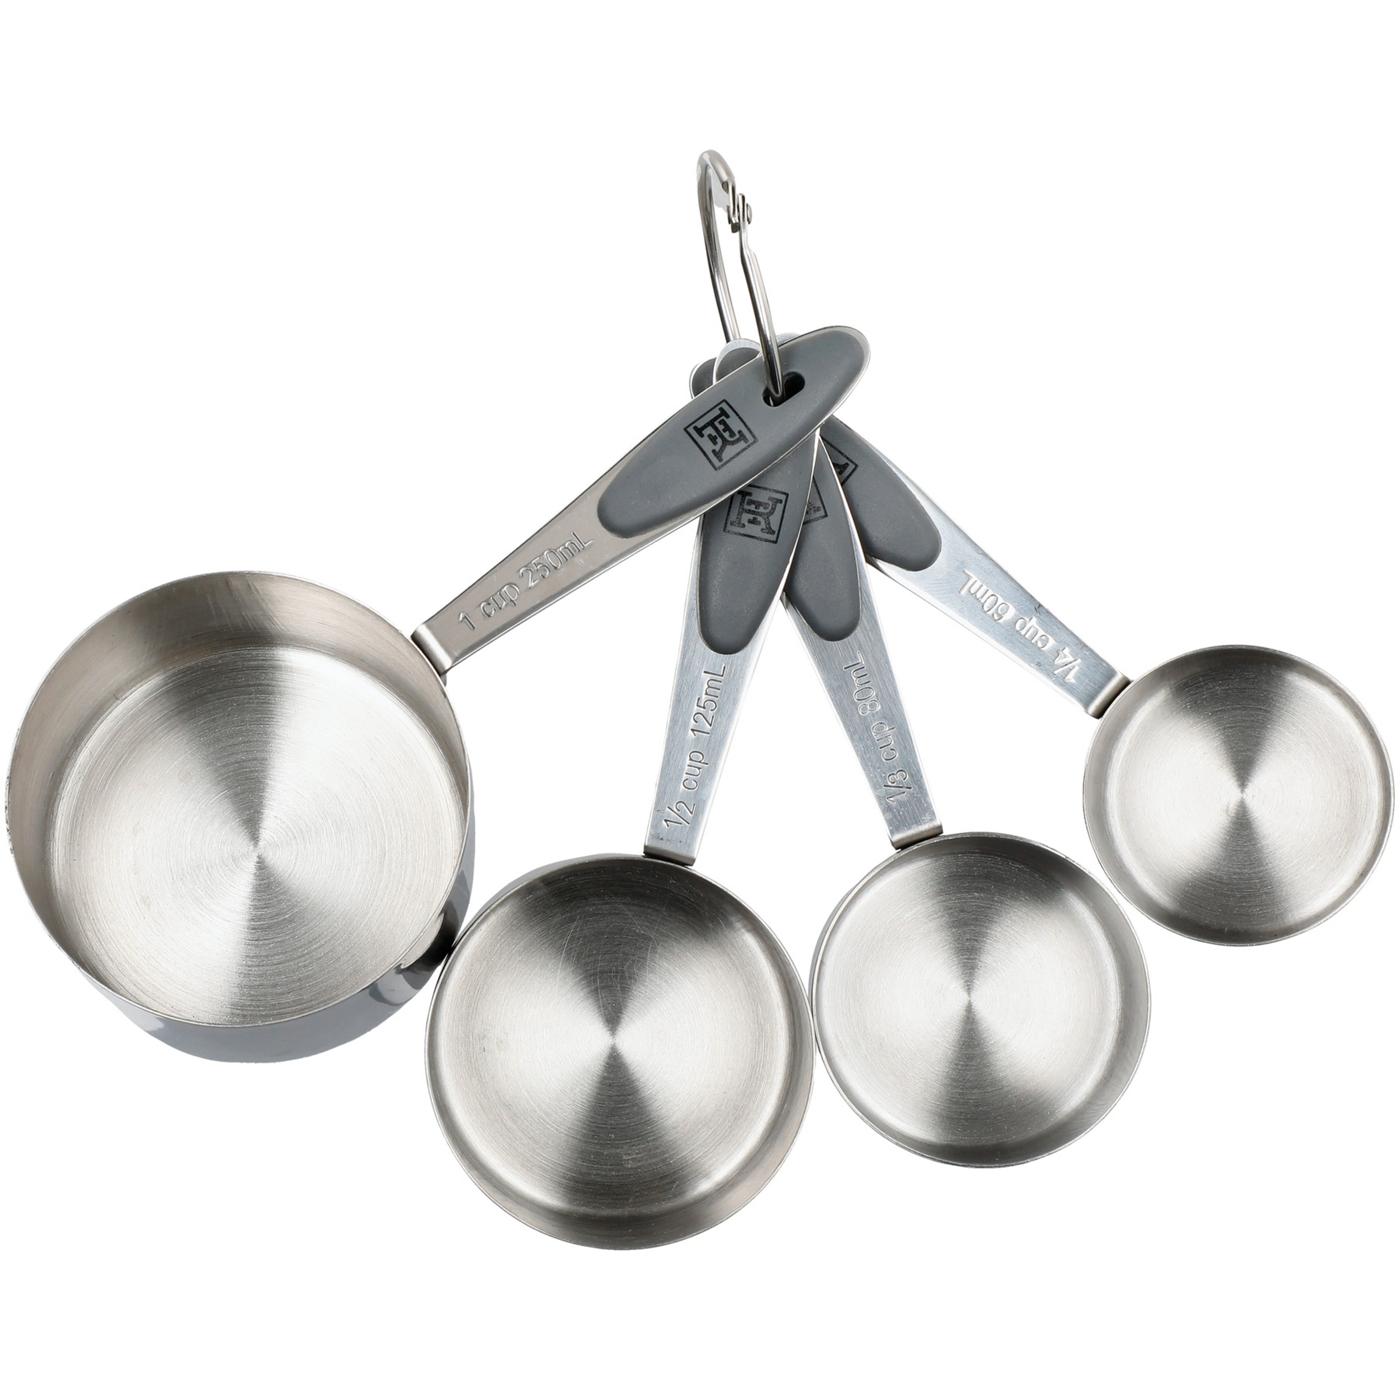 Measuring Cups and Spoons, 16 Piece Stainless Steel - Bed Bath & Beyond -  32064632